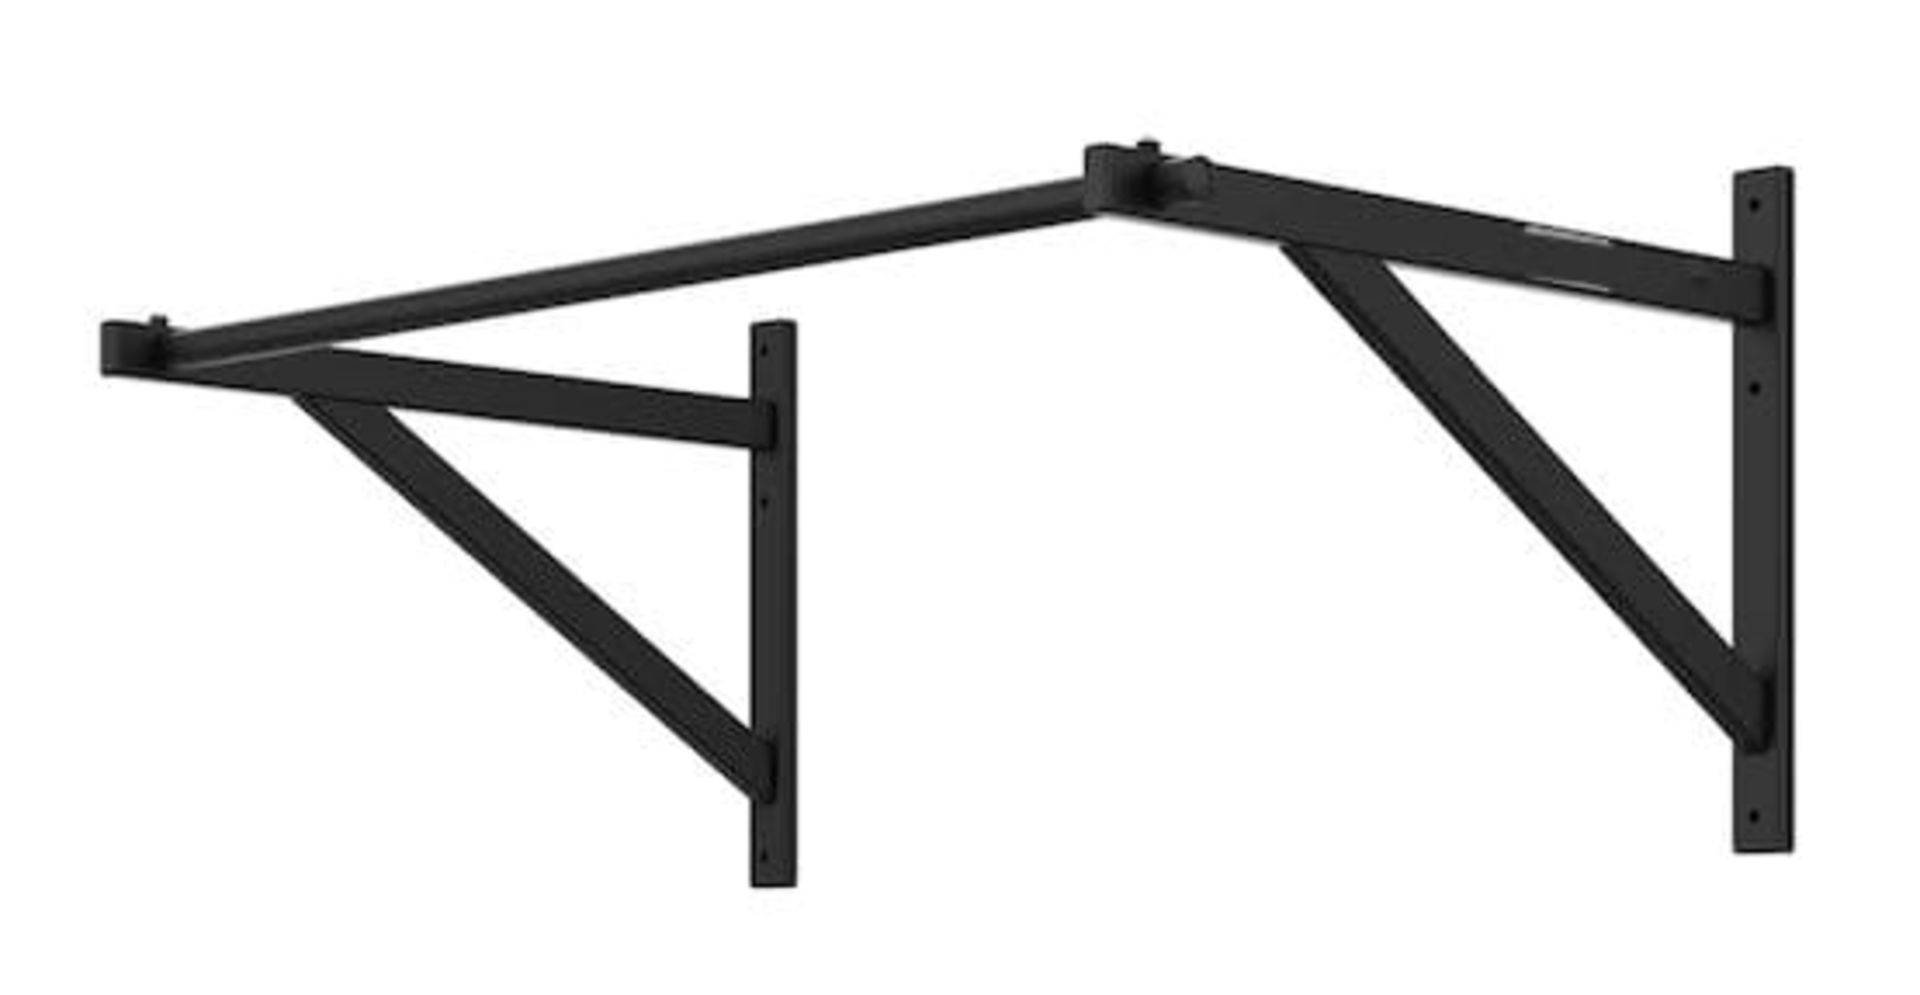 32 x BLACK WALL MOUNTED PULL UP BARS